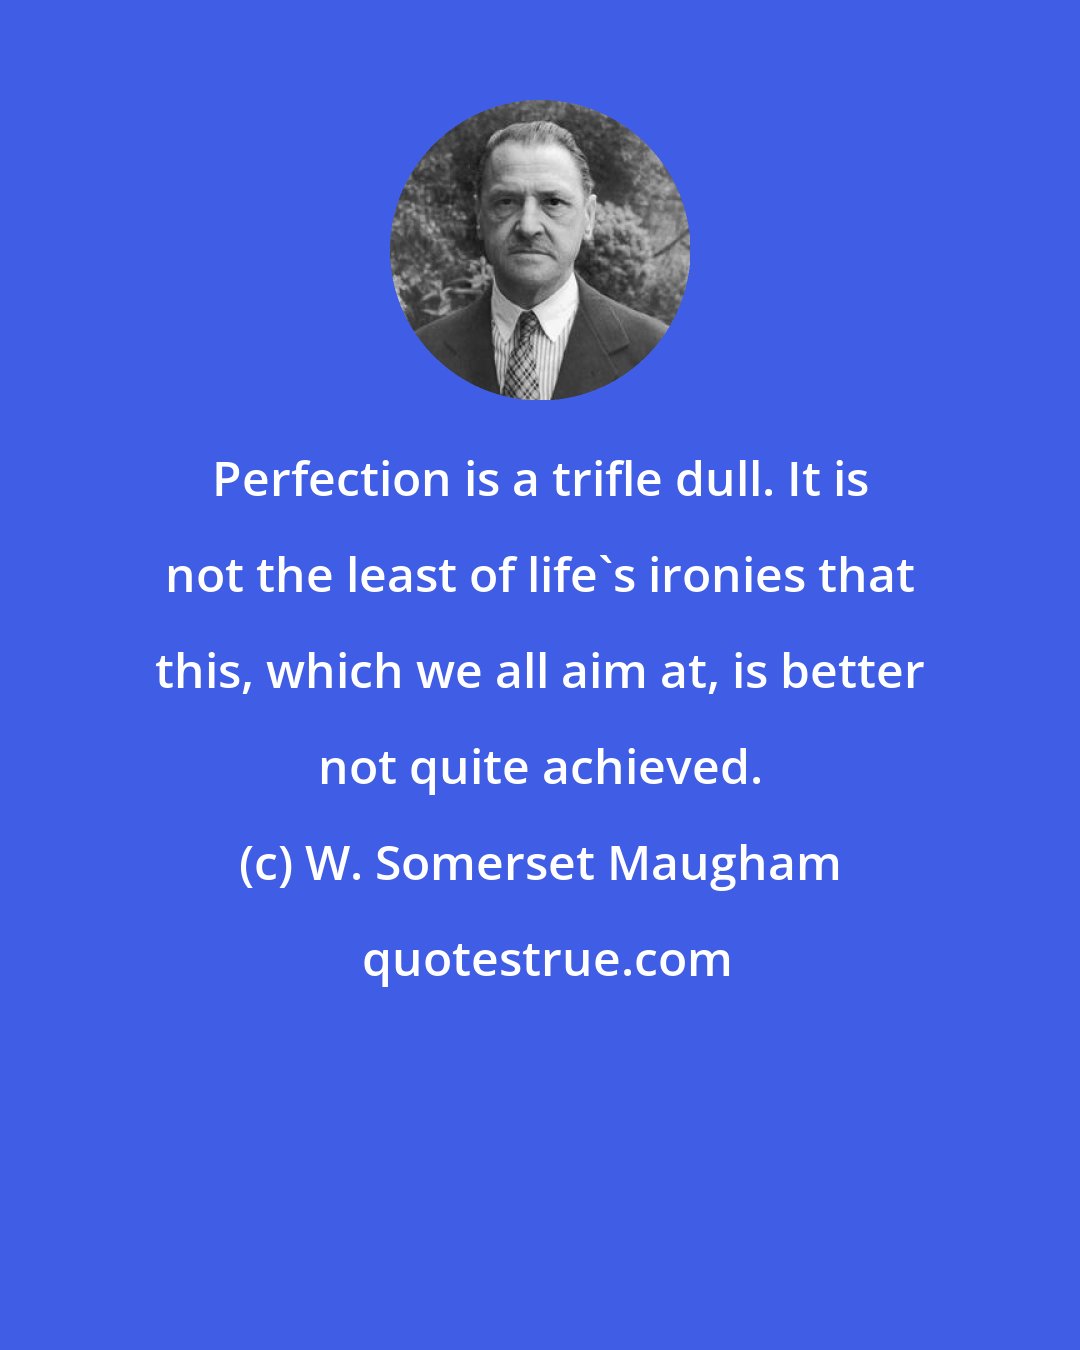 W. Somerset Maugham: Perfection is a trifle dull. It is not the least of life's ironies that this, which we all aim at, is better not quite achieved.